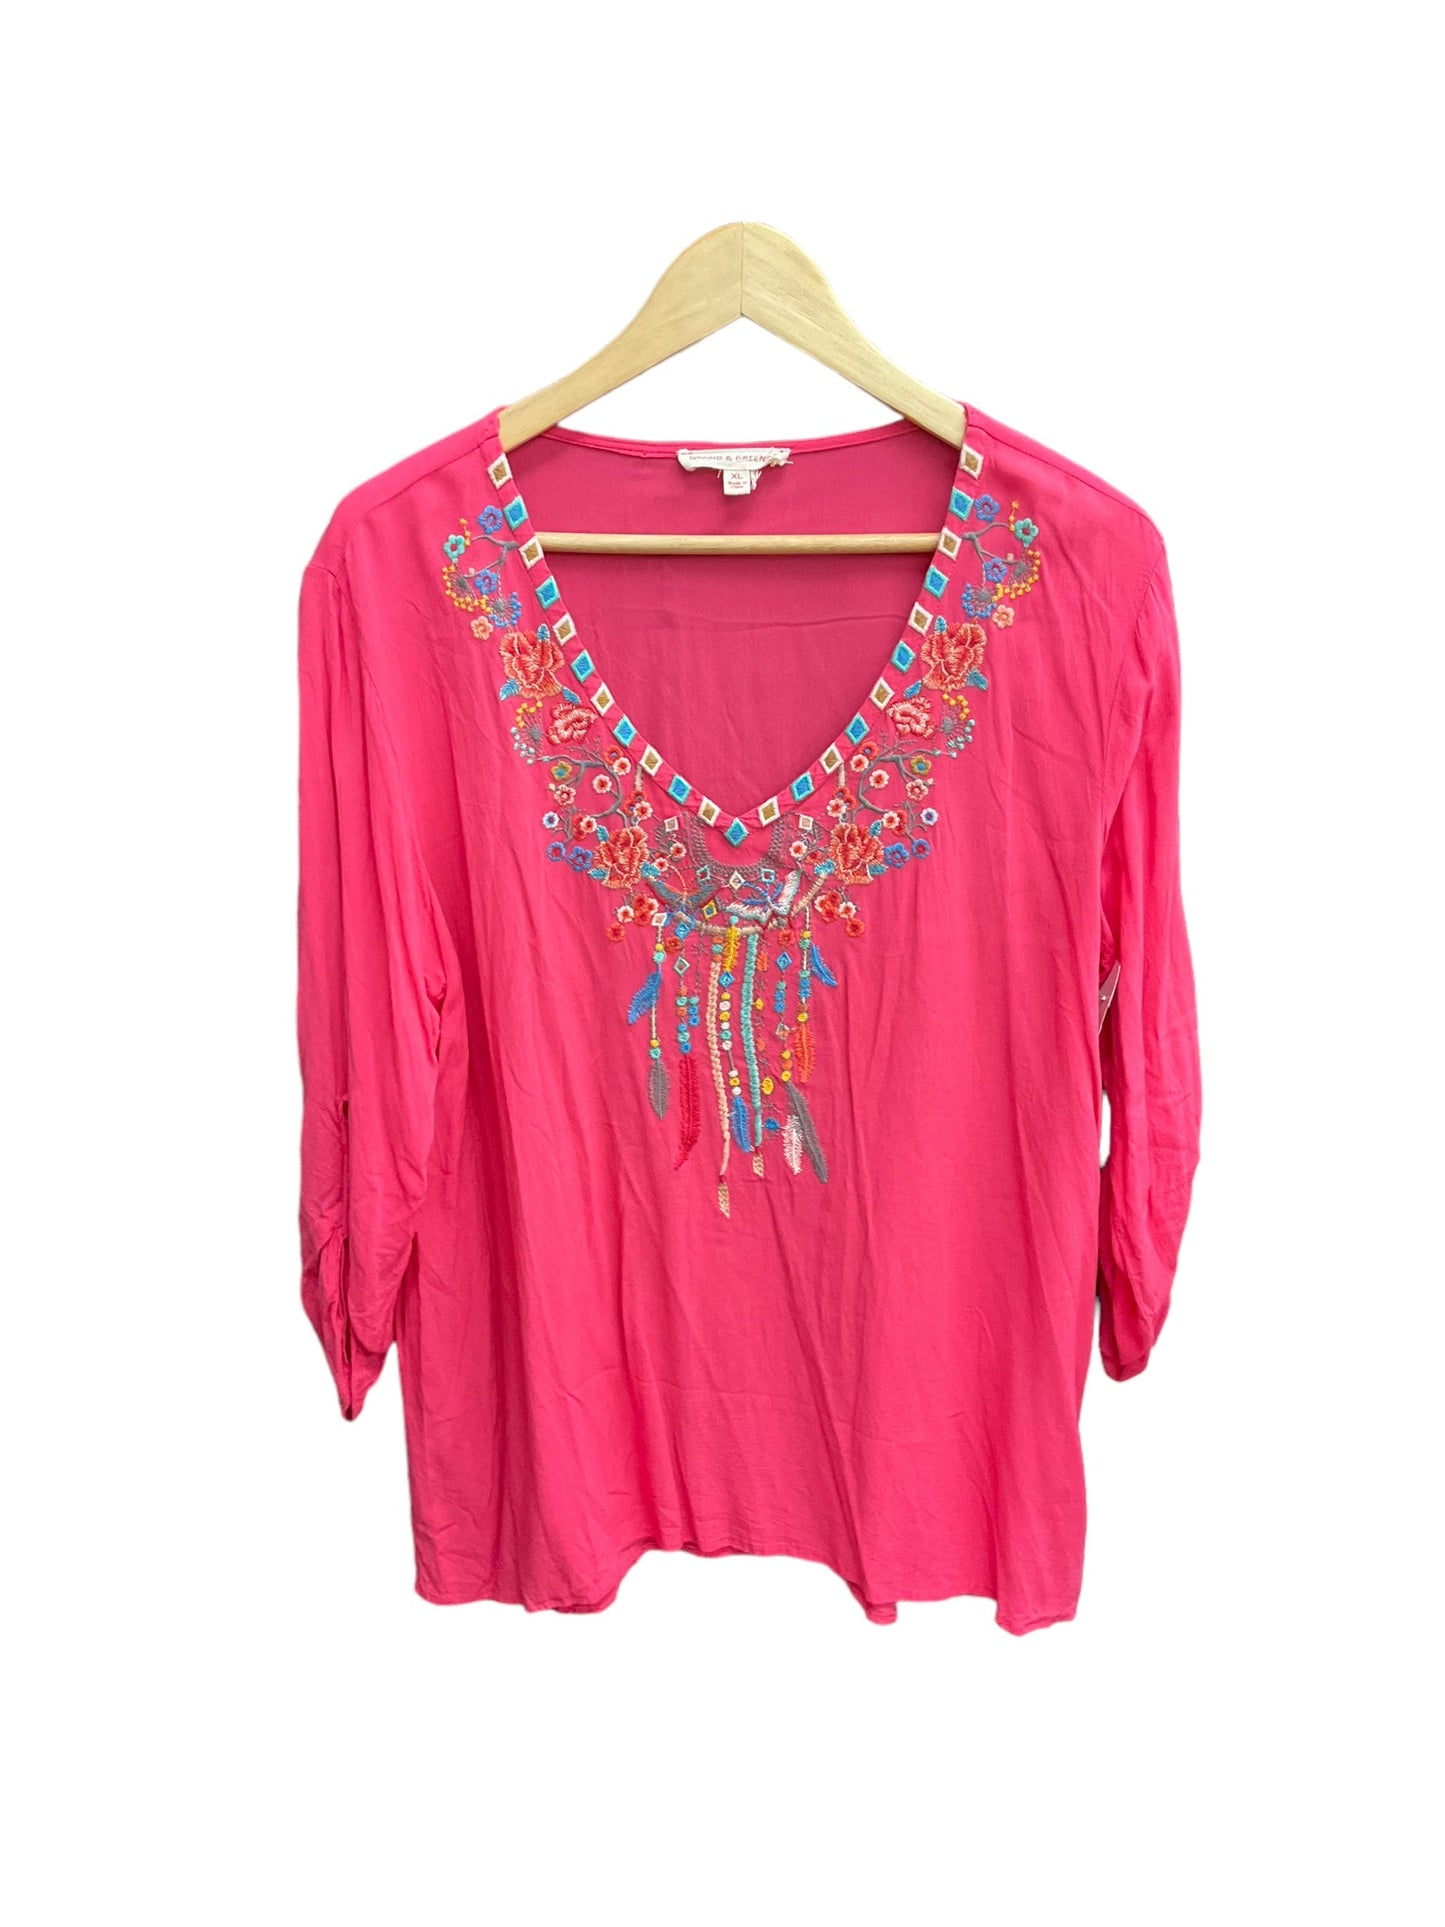 Pink Top 3/4 Sleeve Grand And Greene, Size Xl